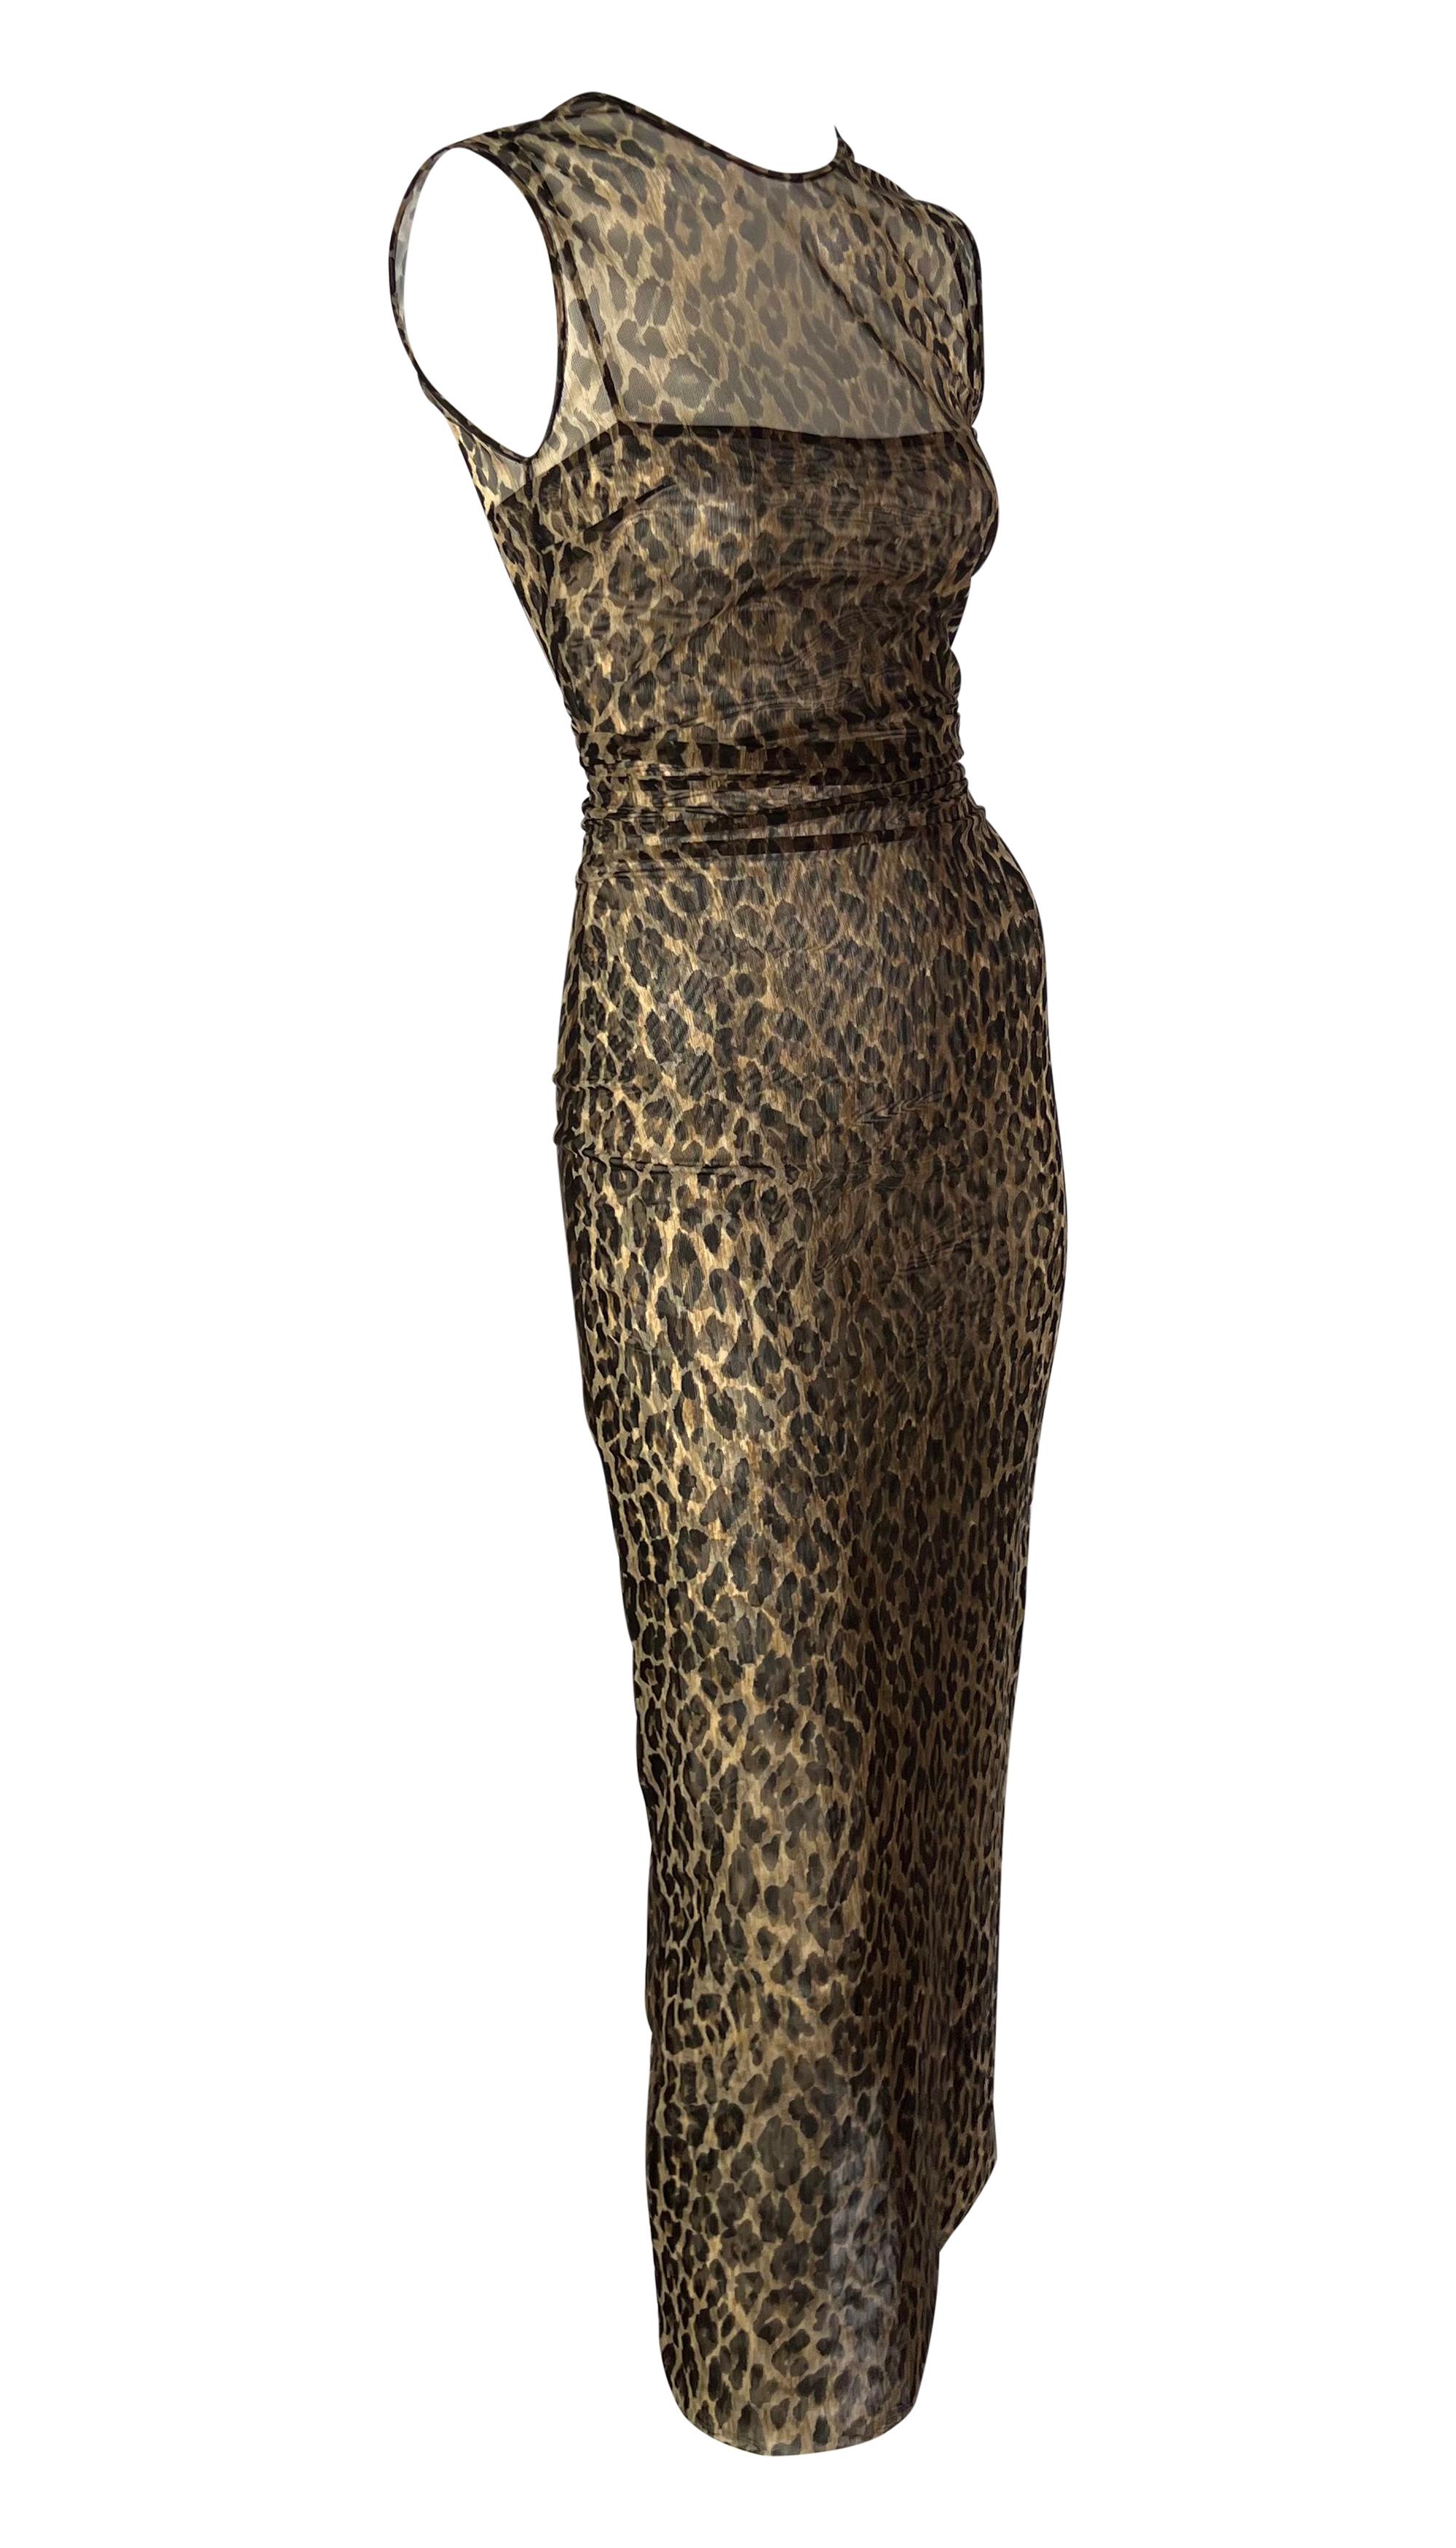 Late 1990s Dolce & Gabbana Sheer Sleeveless Cheetah Print Ruched Bodycon Dress For Sale 3